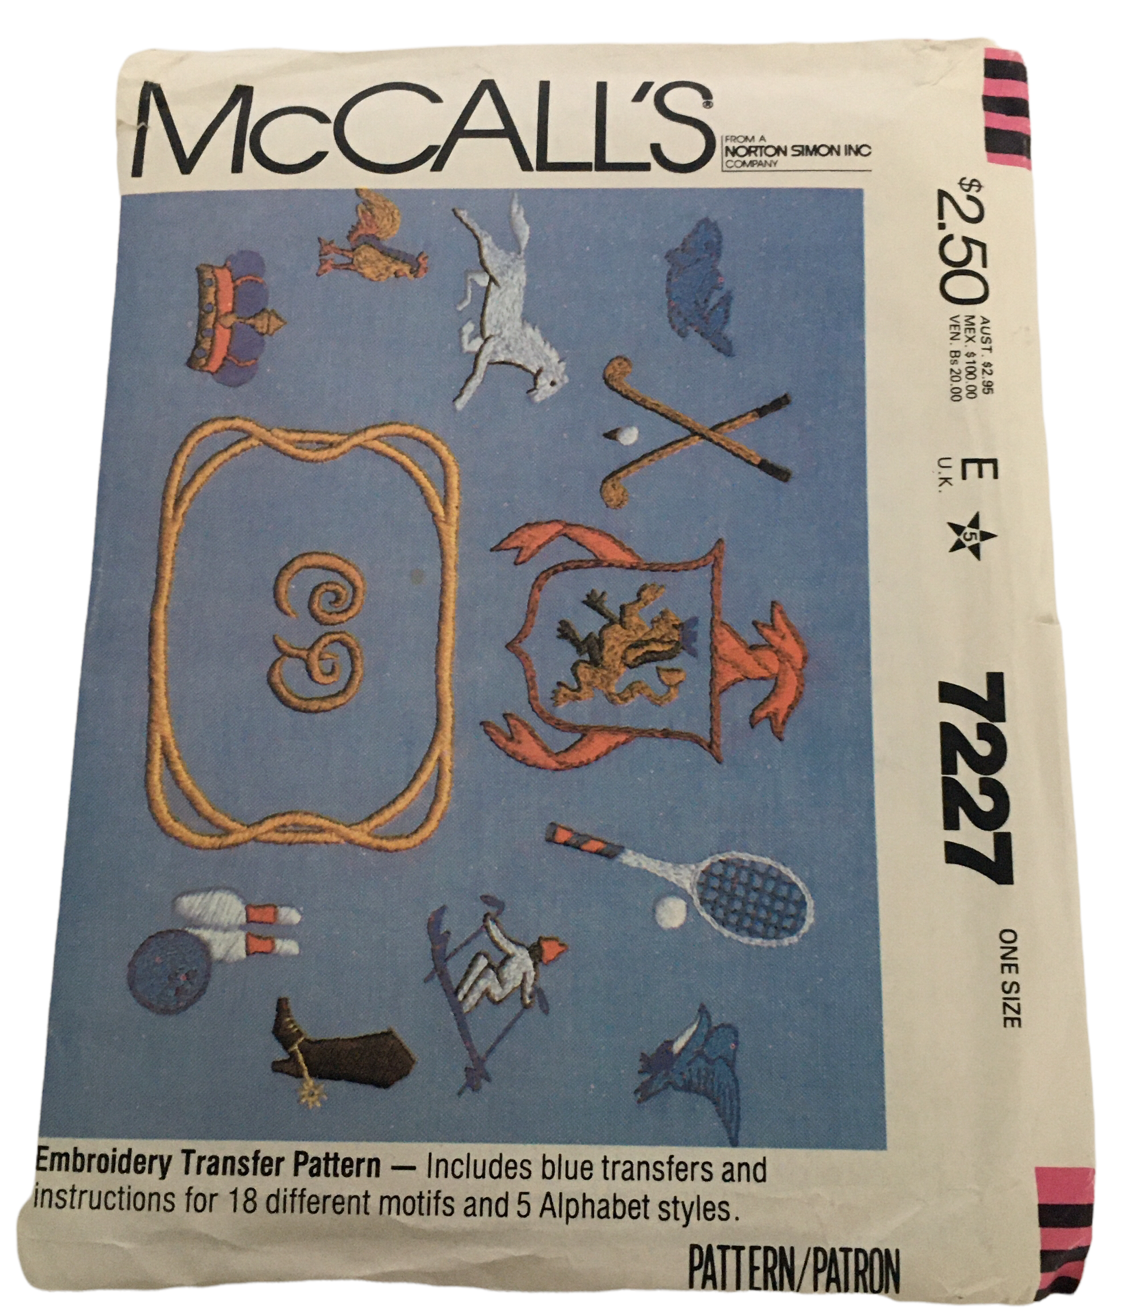 McCalls Sewing Pattern 7227 Embroidery Transfer Pattern Alphabet Letters Sports - $4.99